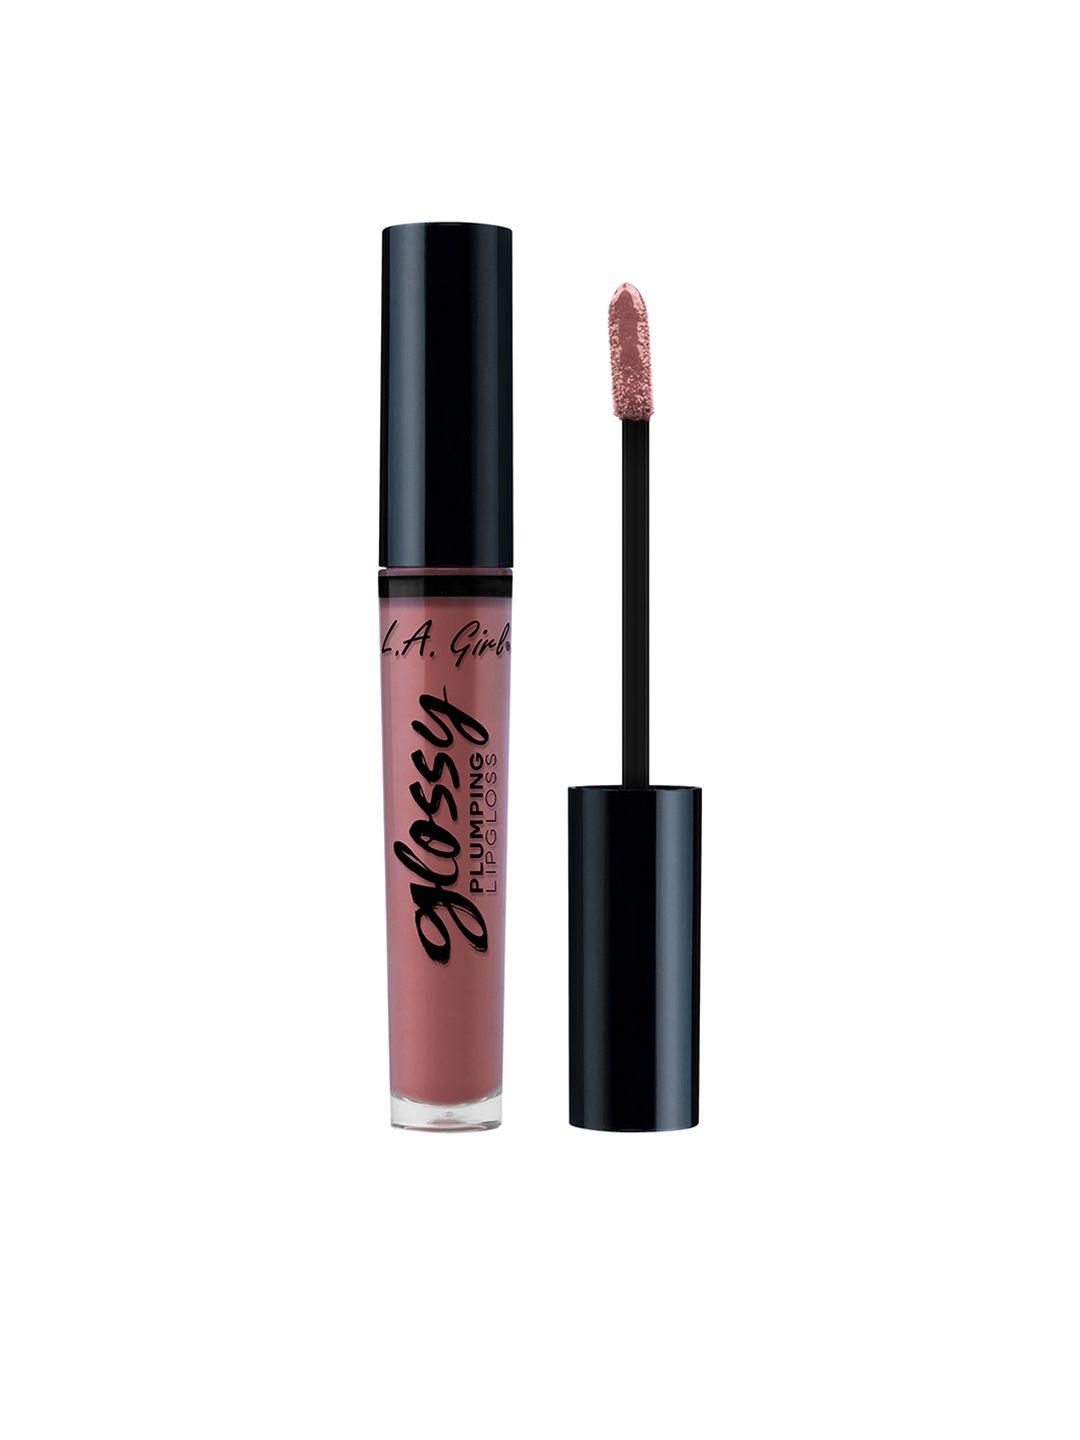 l.a girl glossy plumping lip gloss with vitamin e 5 ml - sumptuous